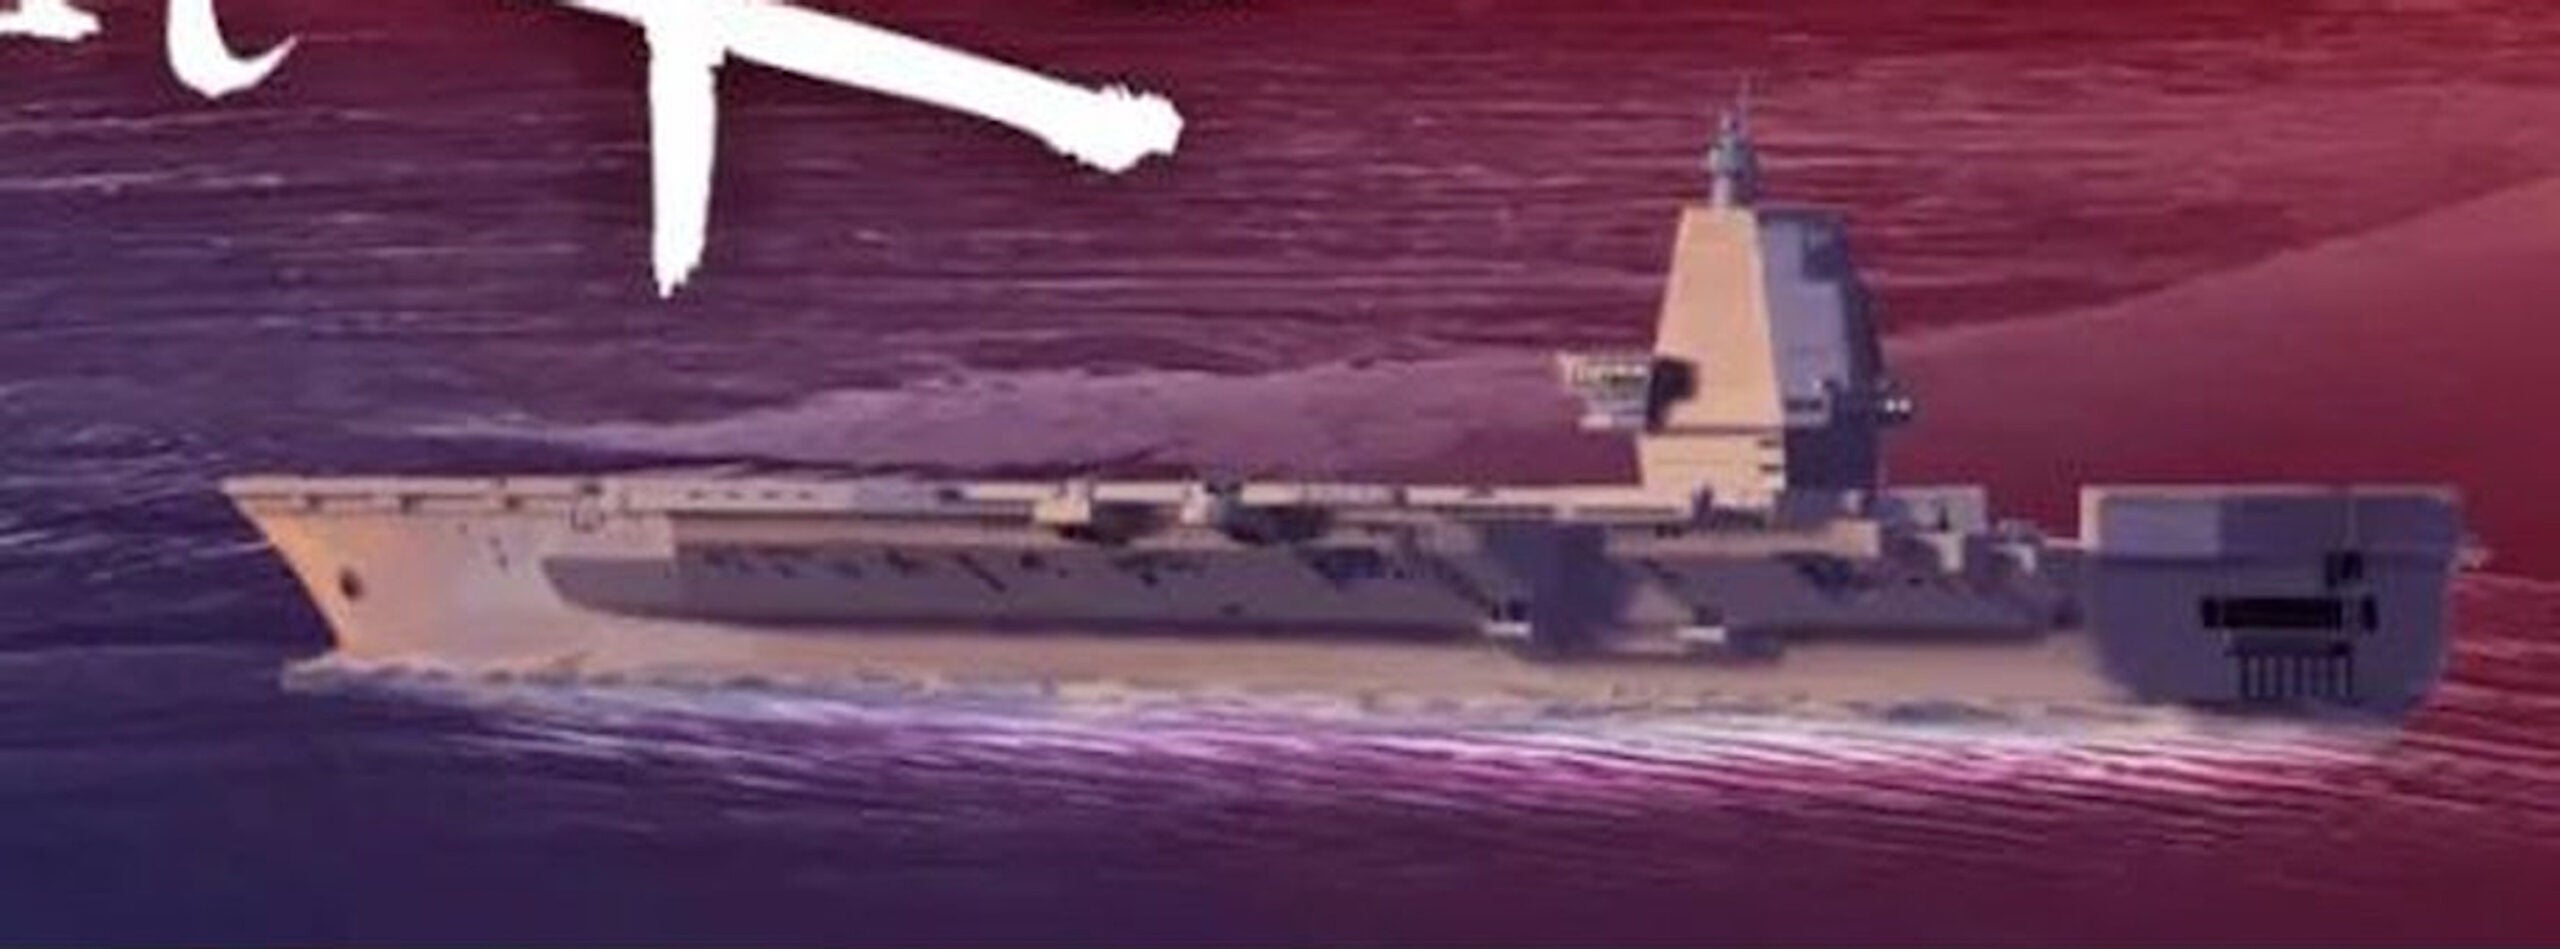 chinese-carrier-concept-art-rear-scaled.jpg